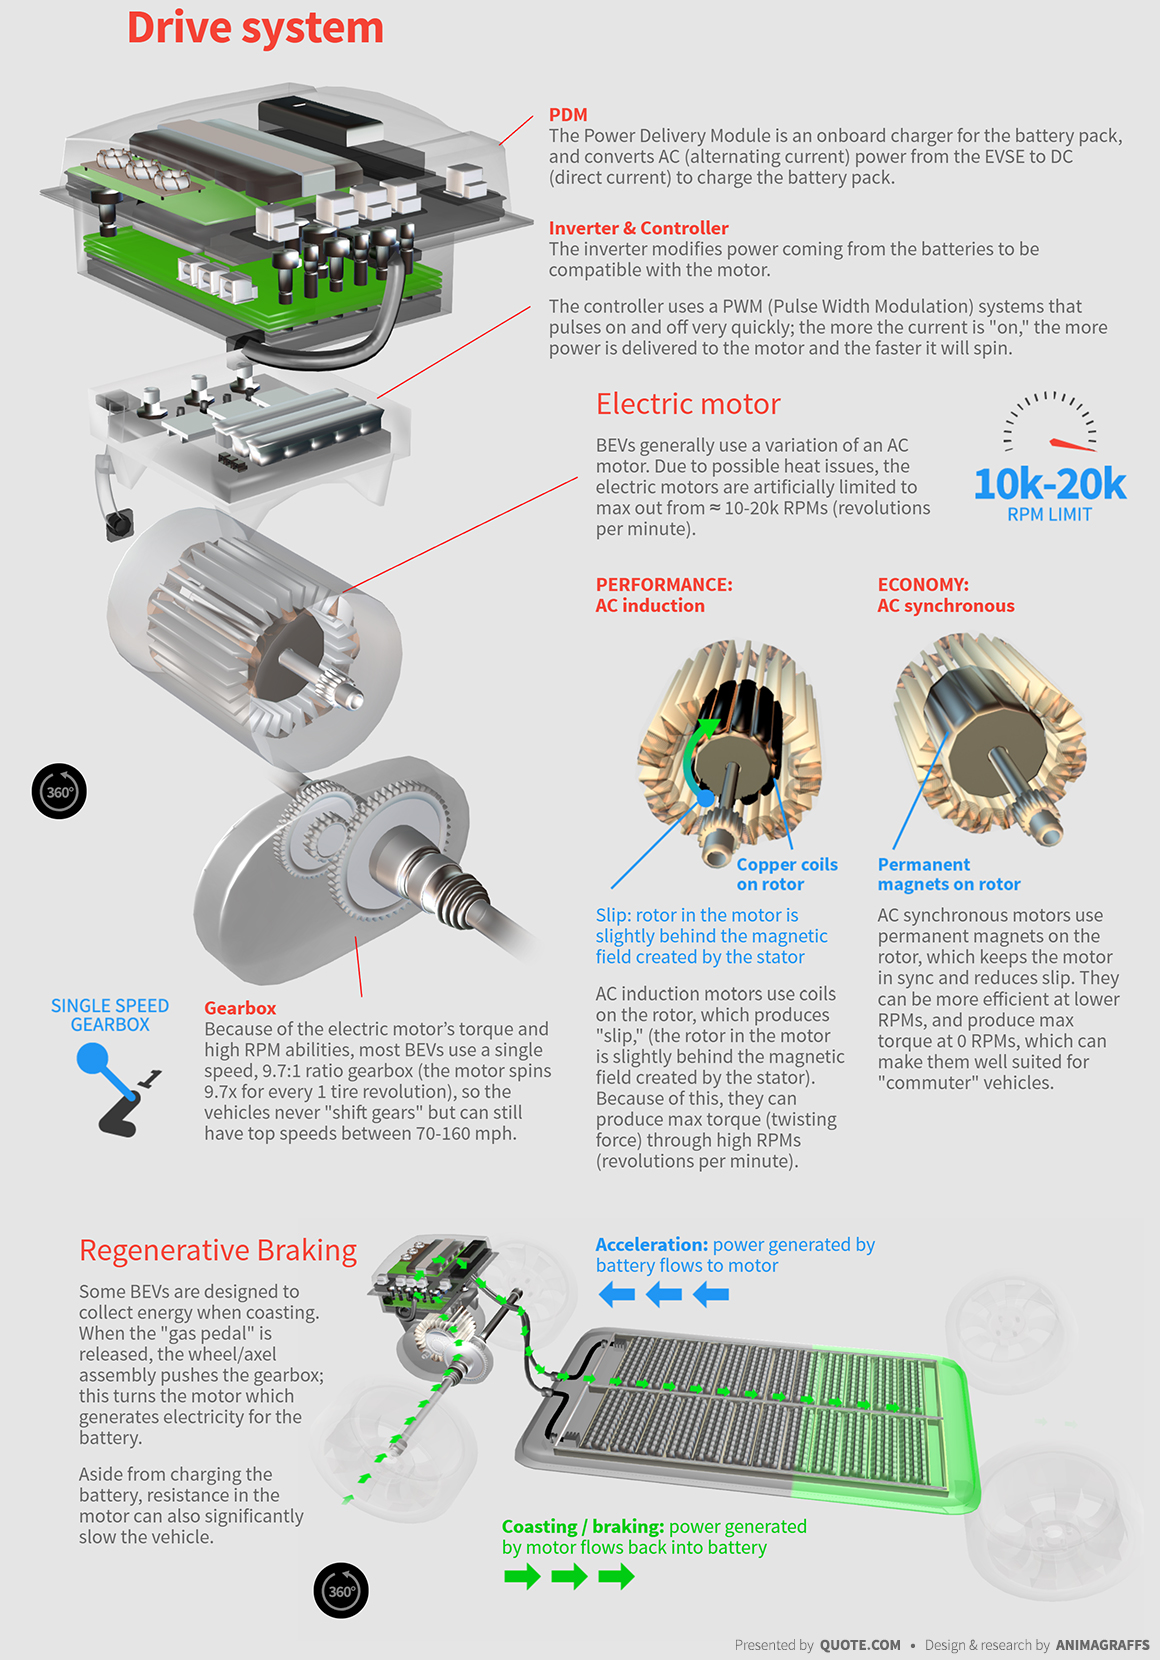 How Electric Cars Work